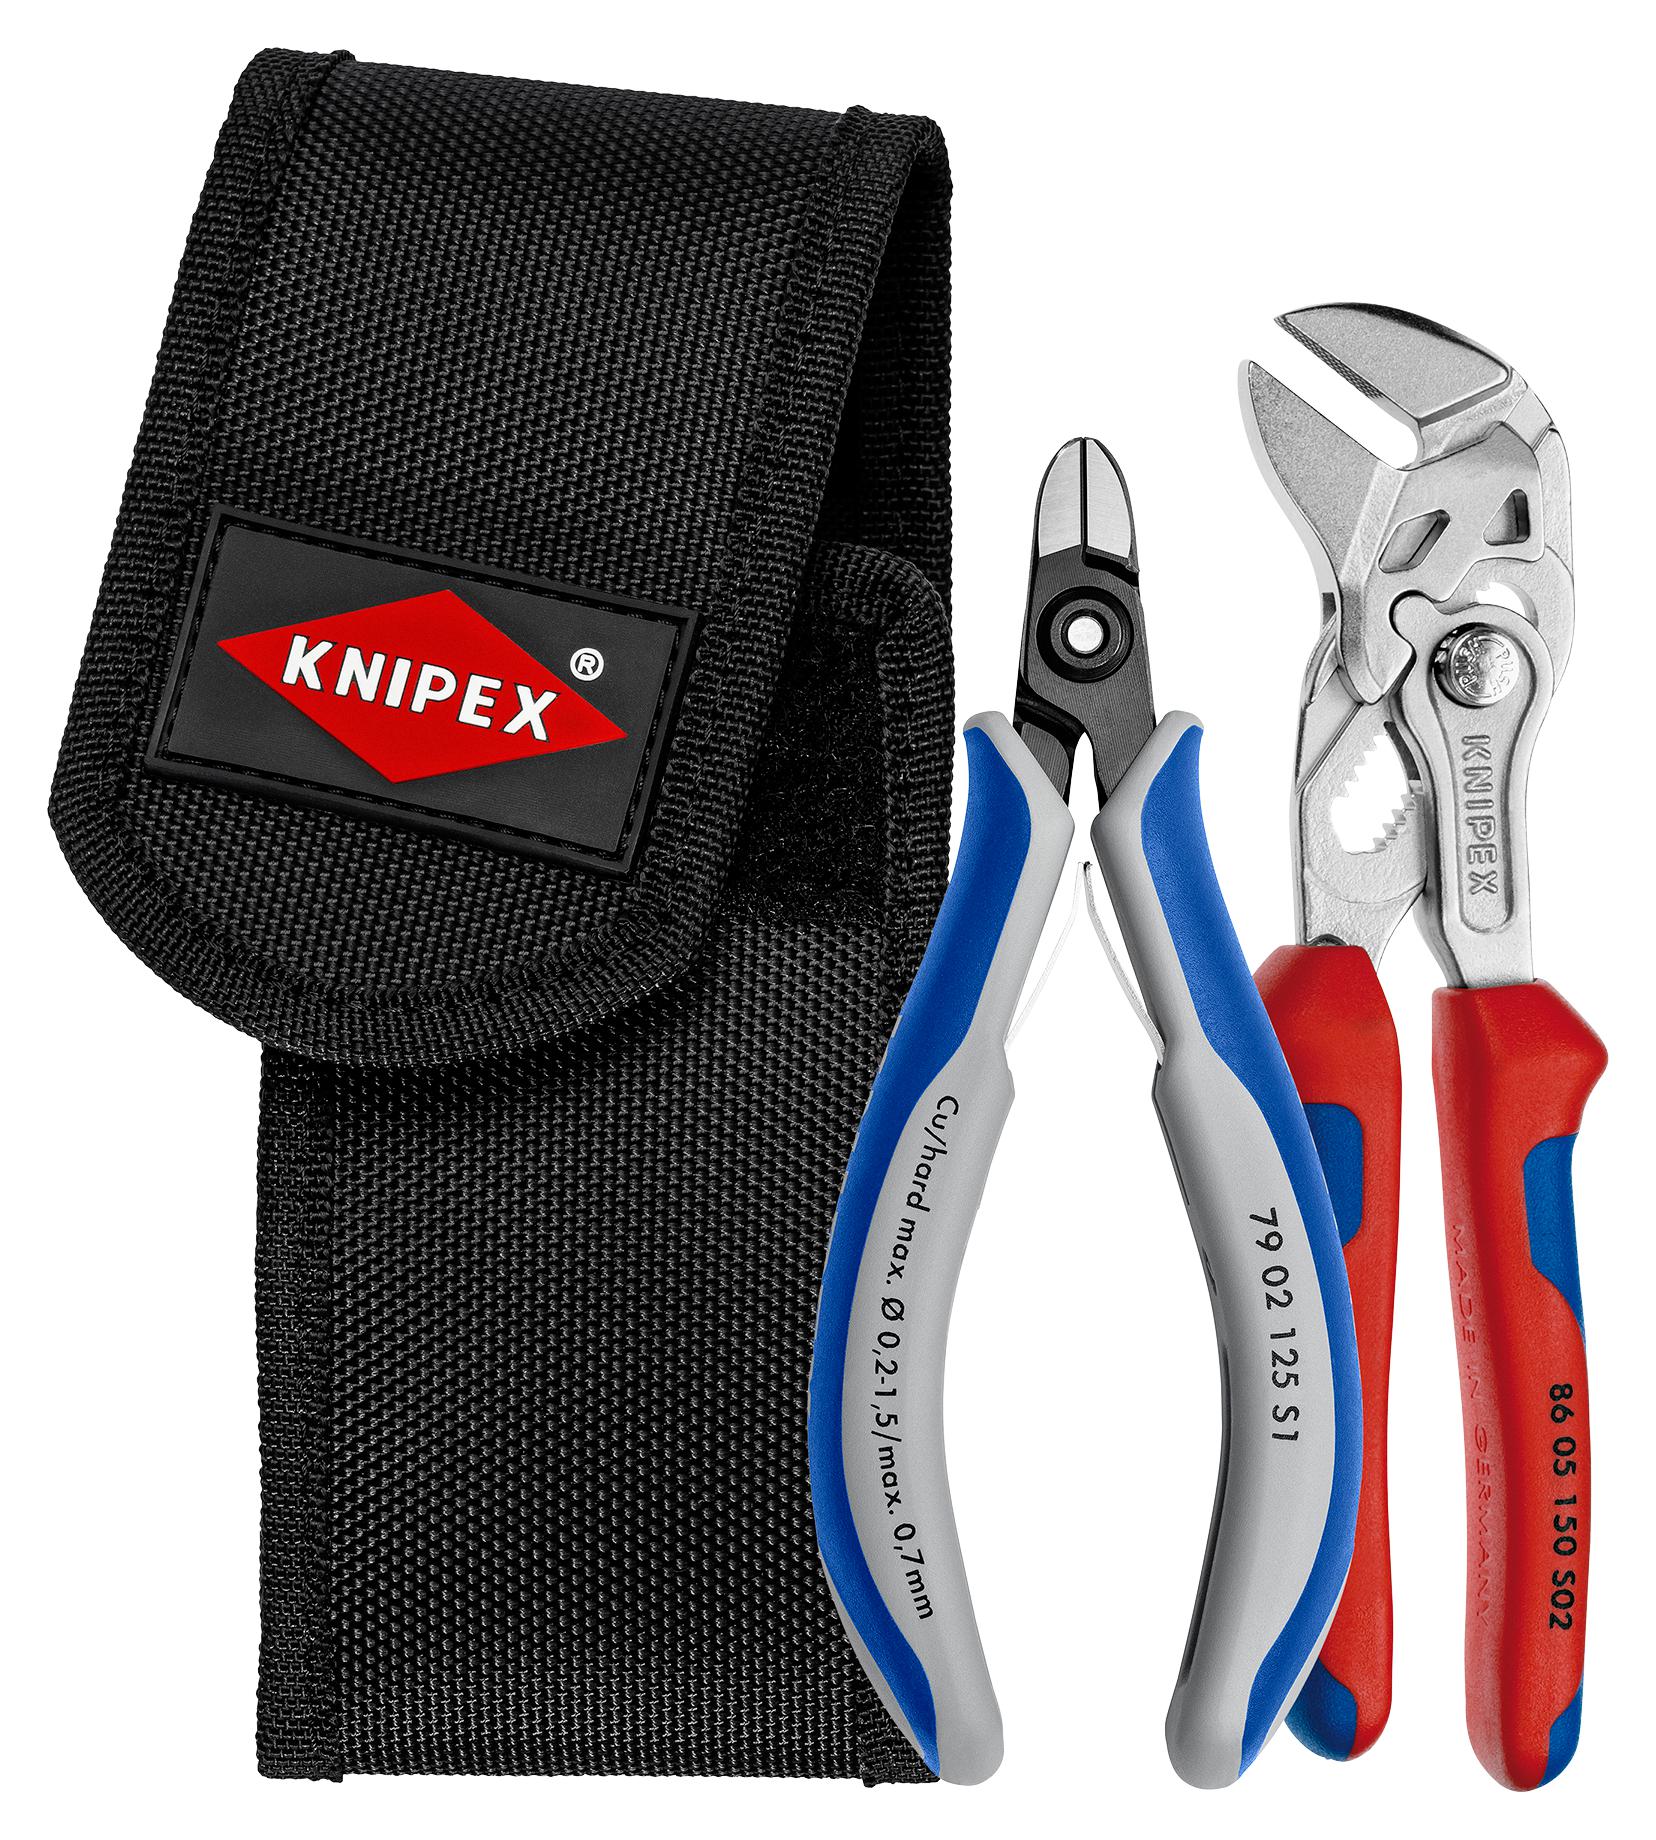 00 19 72 V01 CABLE TIE CUTTING SET, 70MM X 38MM, 325G KNIPEX